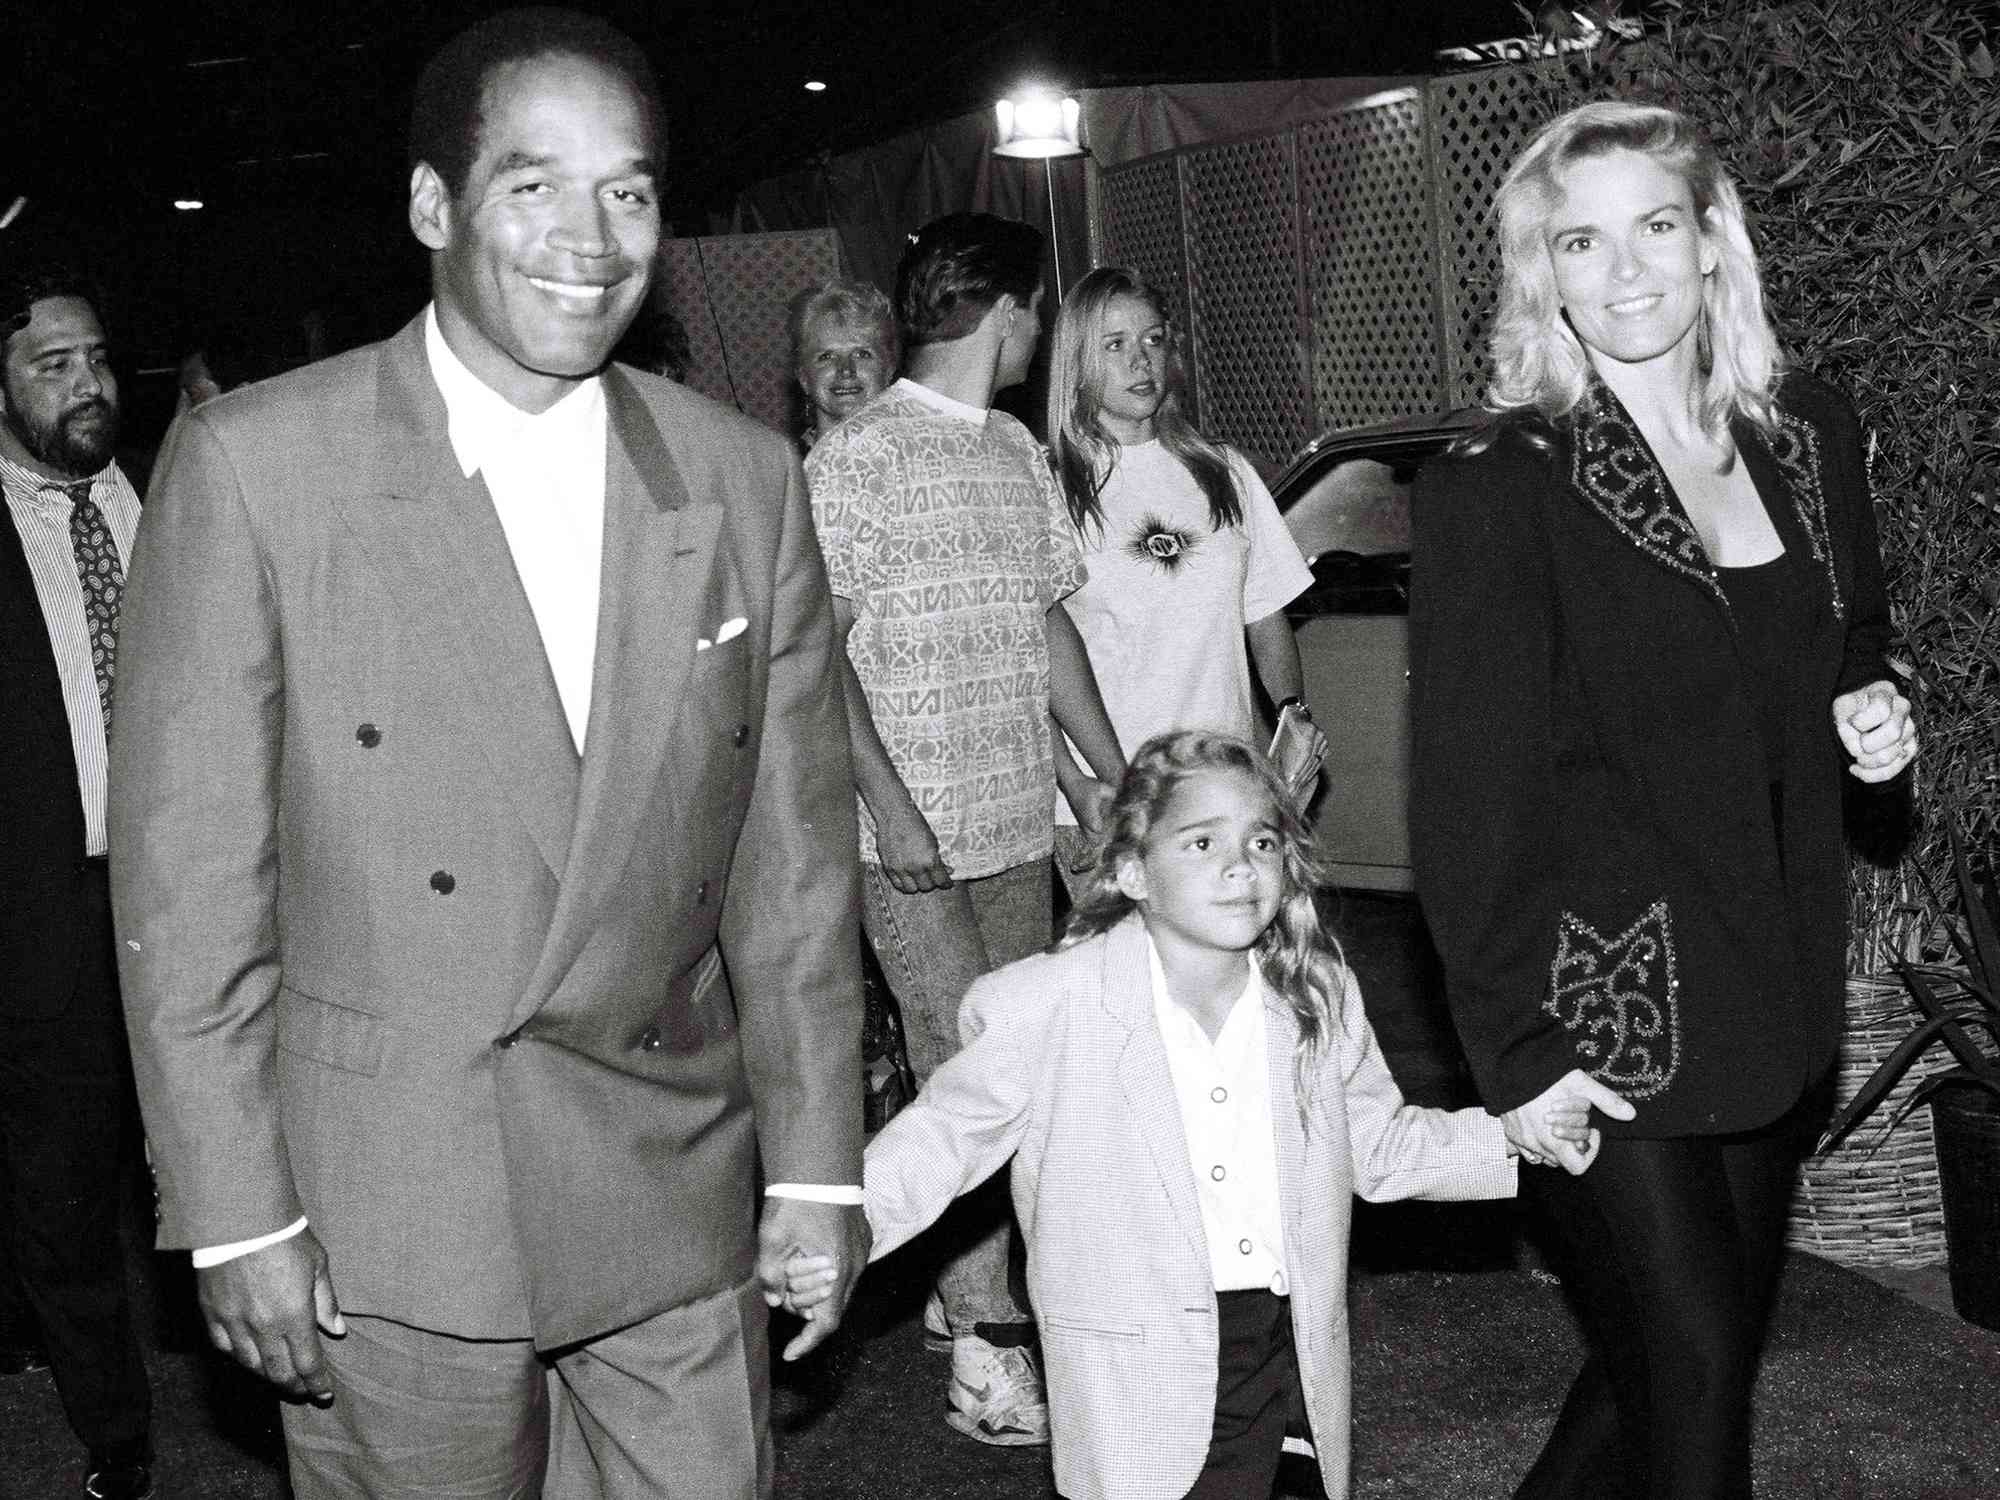 OJ Simpson, Nicole Simpson and daughter Sydney Simpson at the 'Naked Gun 2 1/2' Premiere on June 27, 1991.